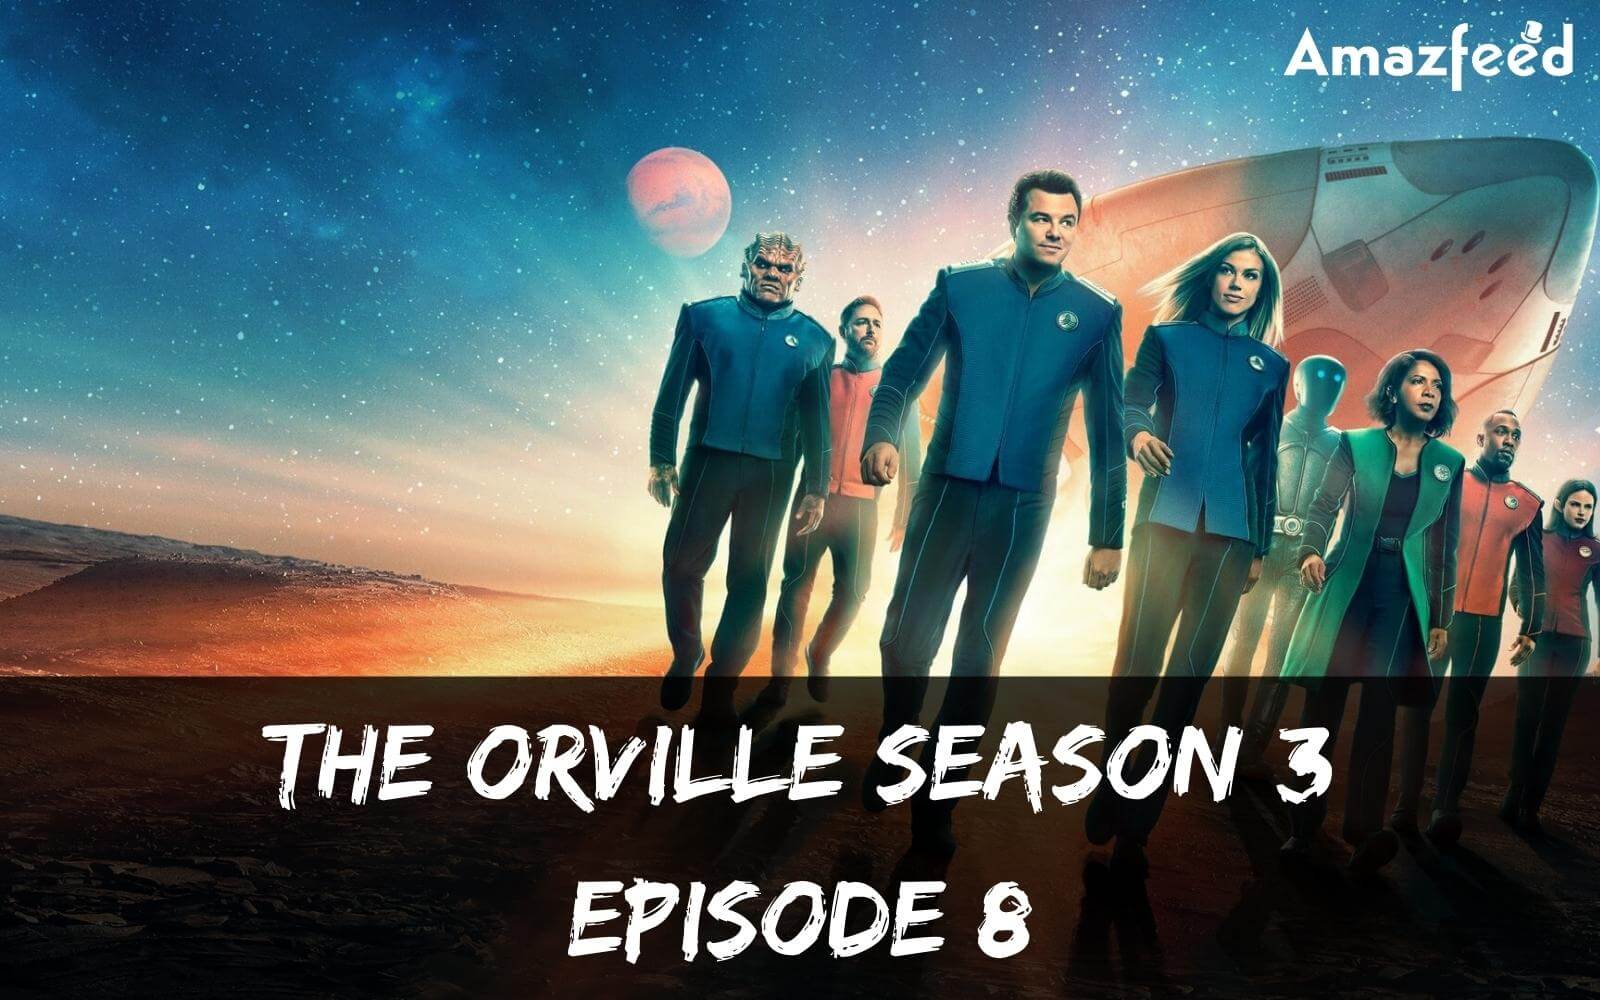 The Orville Season 3 Episode 8: Countdown, Release Date in Australia, UK, And USA